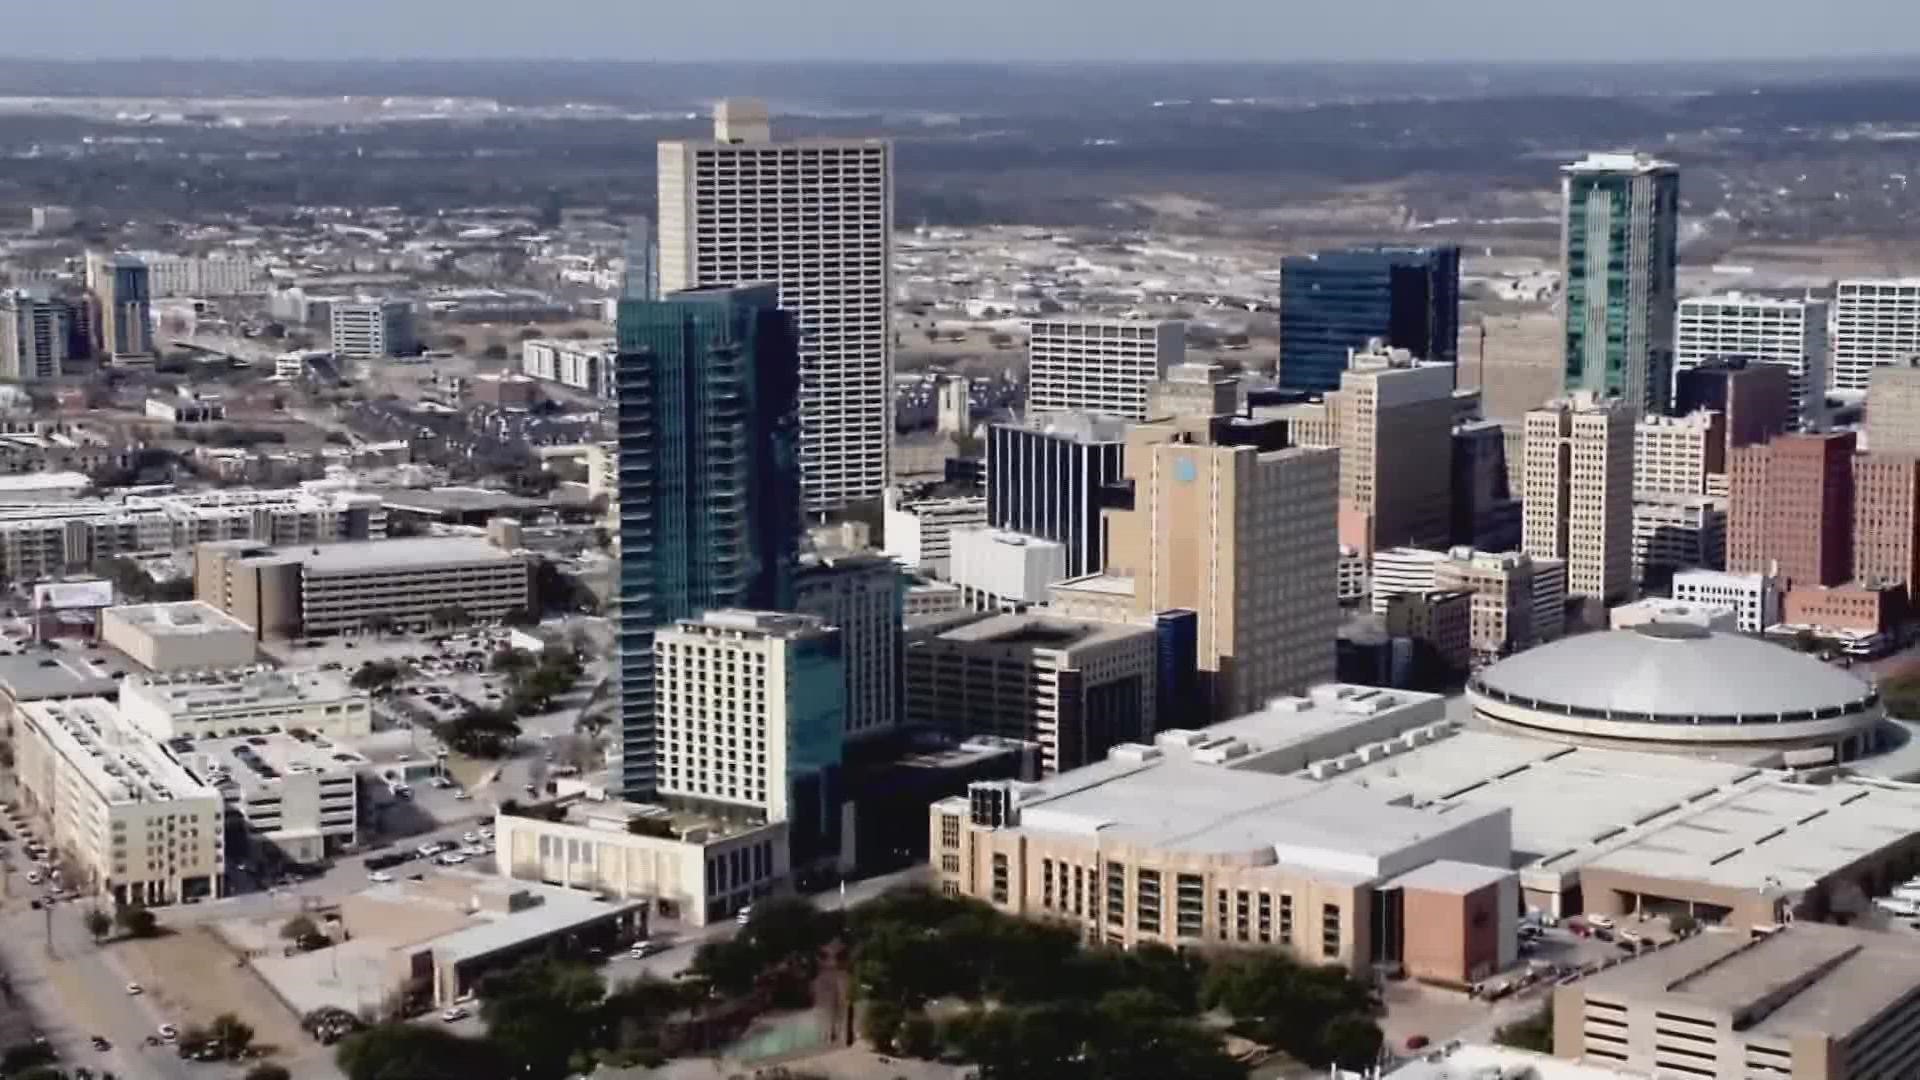 An expansion of the Omni Fort Worth Hotel is the latest in a long list of development projects in the city’s downtown.